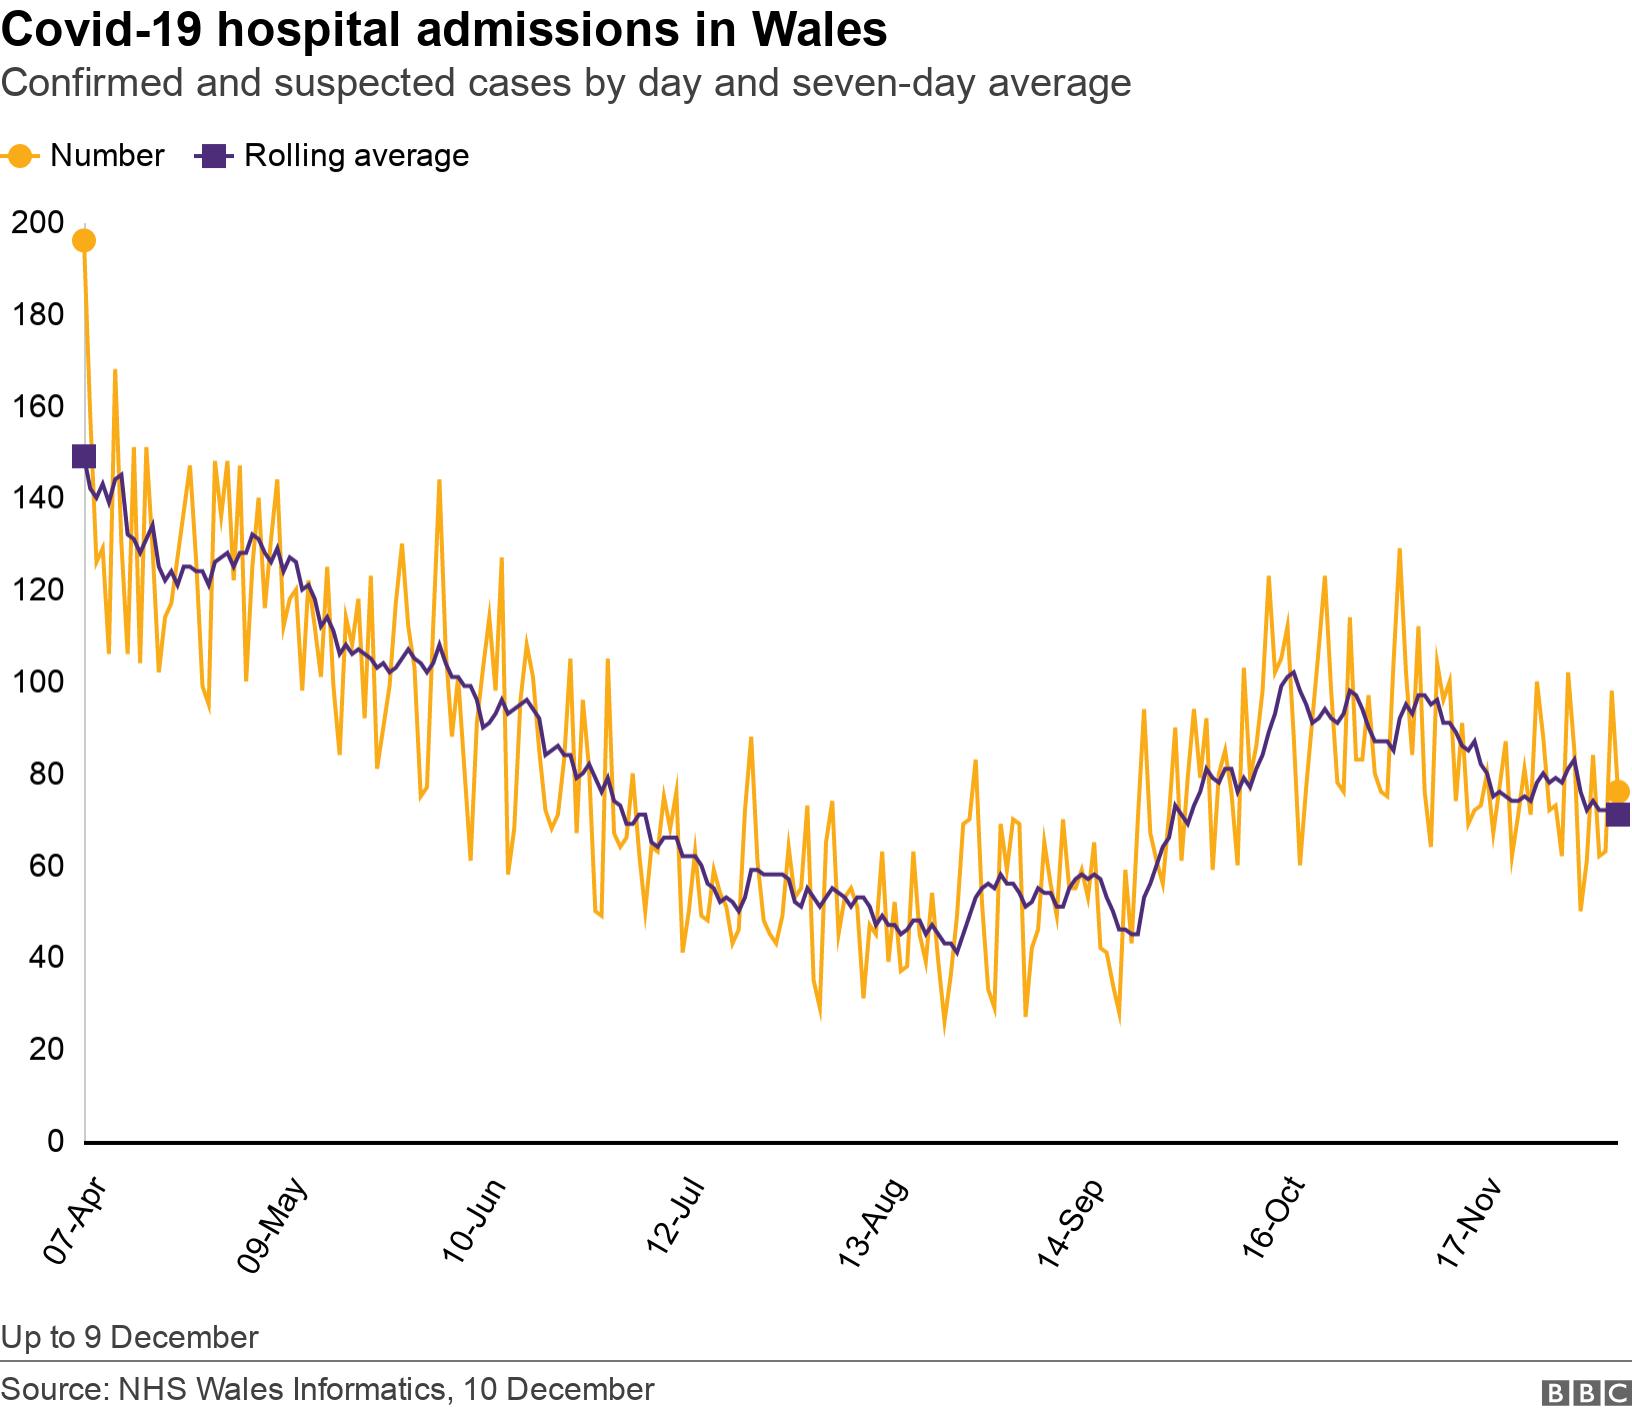 Covid-19 hospital admissions in Wales. Confirmed and suspected cases by day and seven-day average. Up to 9 December.